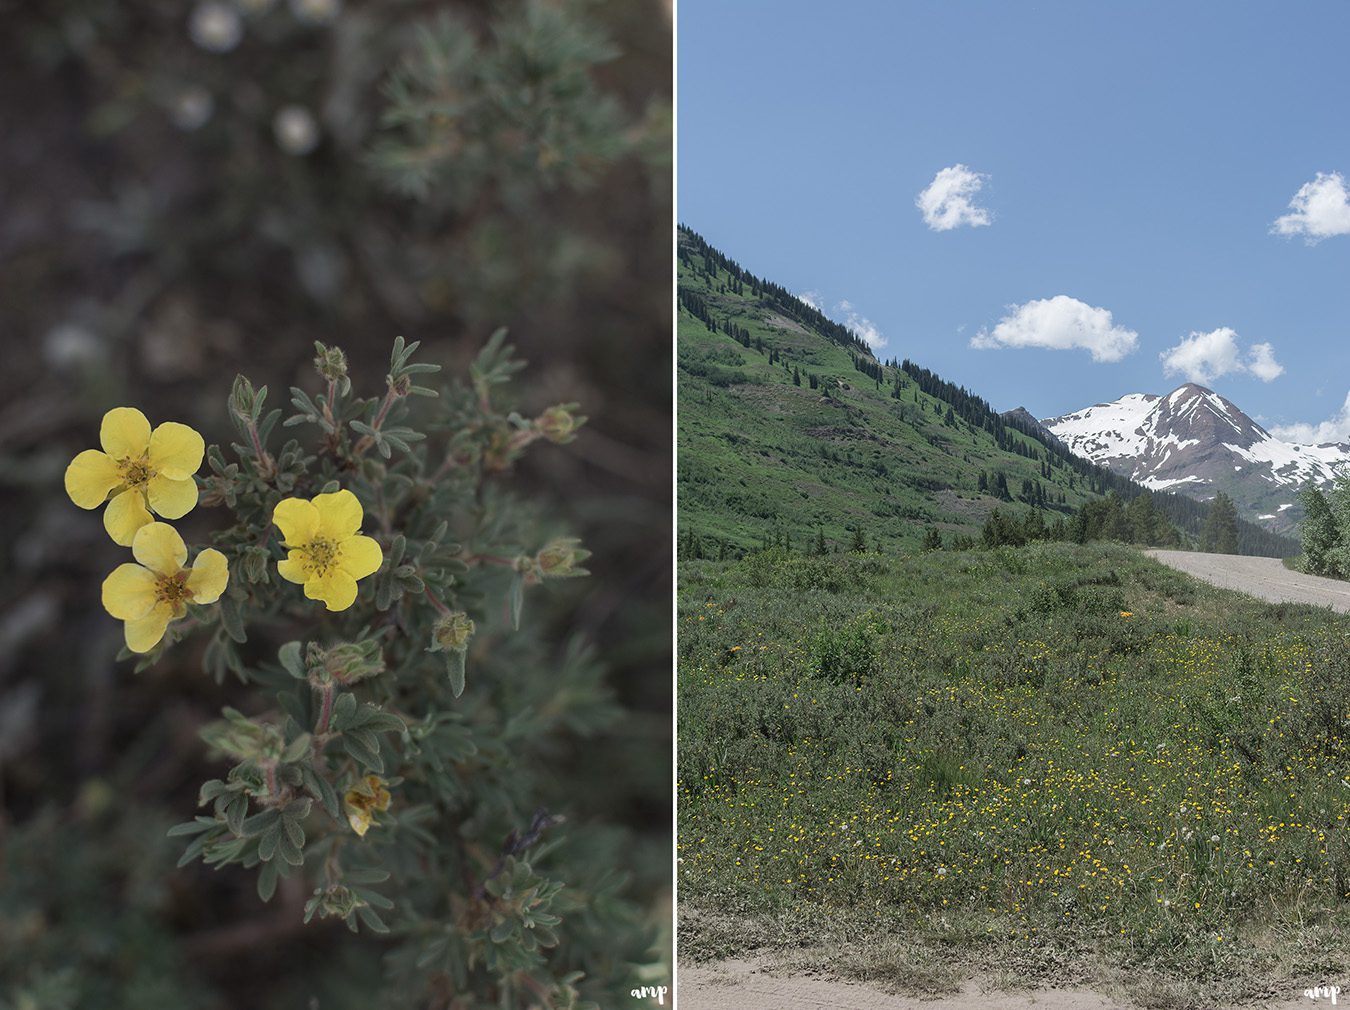 Some wildflowers in Crested Butte